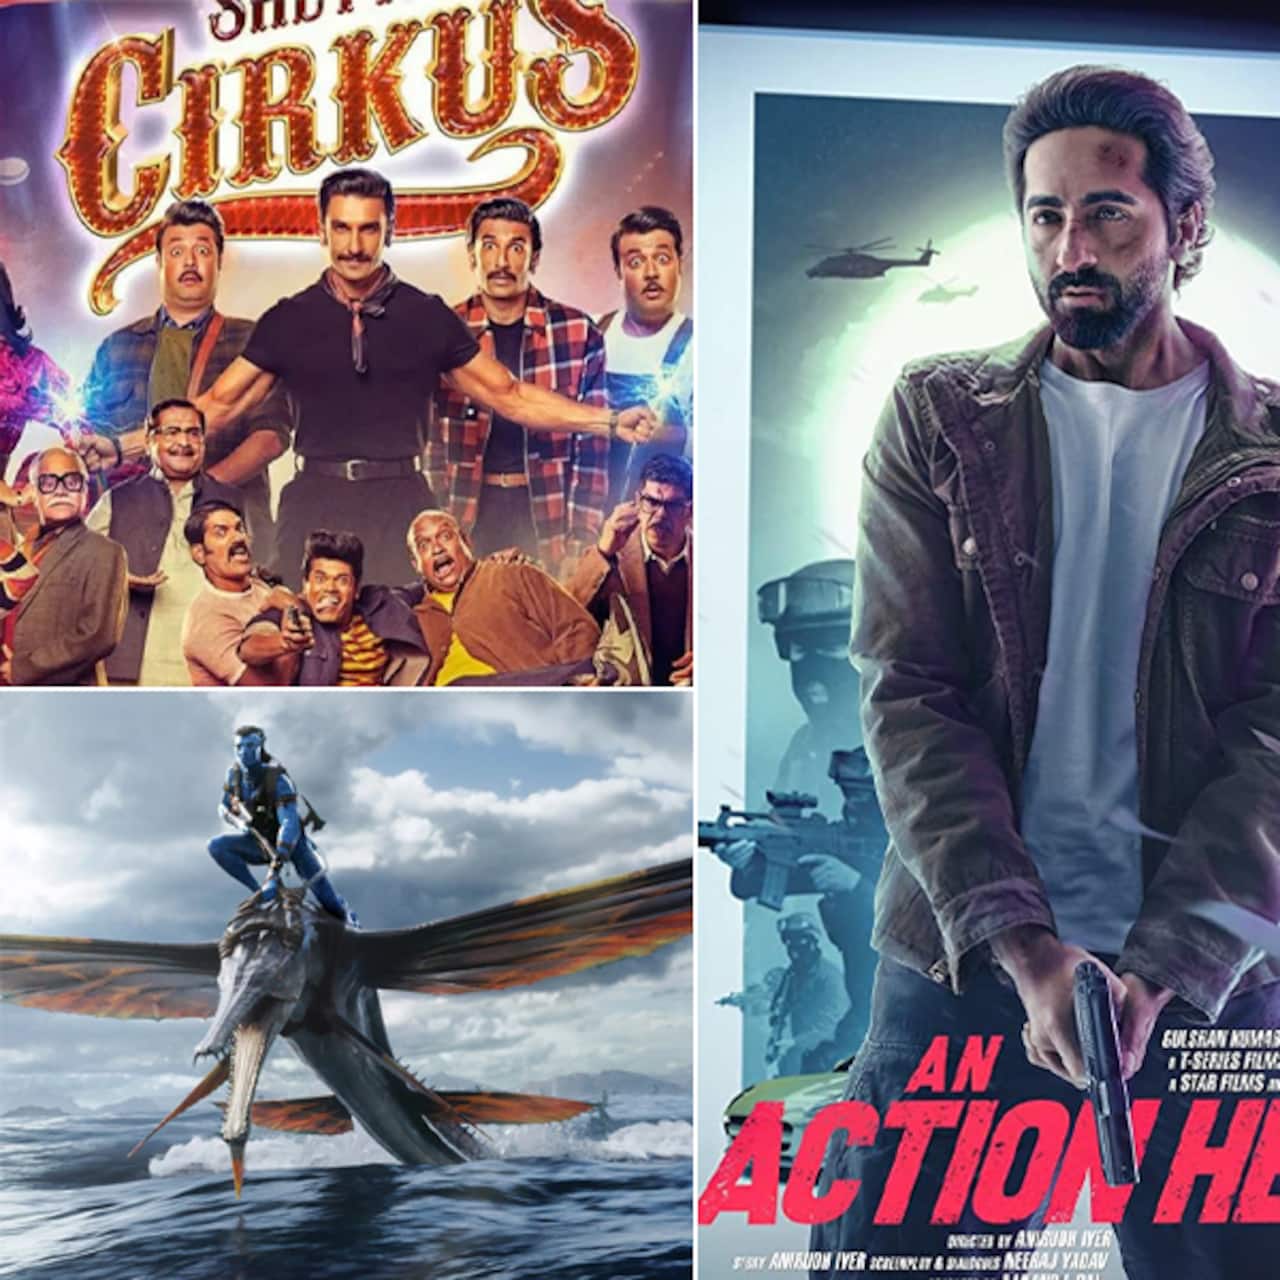 Cirkus, An Action Hero, Avatar: The Way of Water and more upcoming new movies releasing in theatres in December 2022